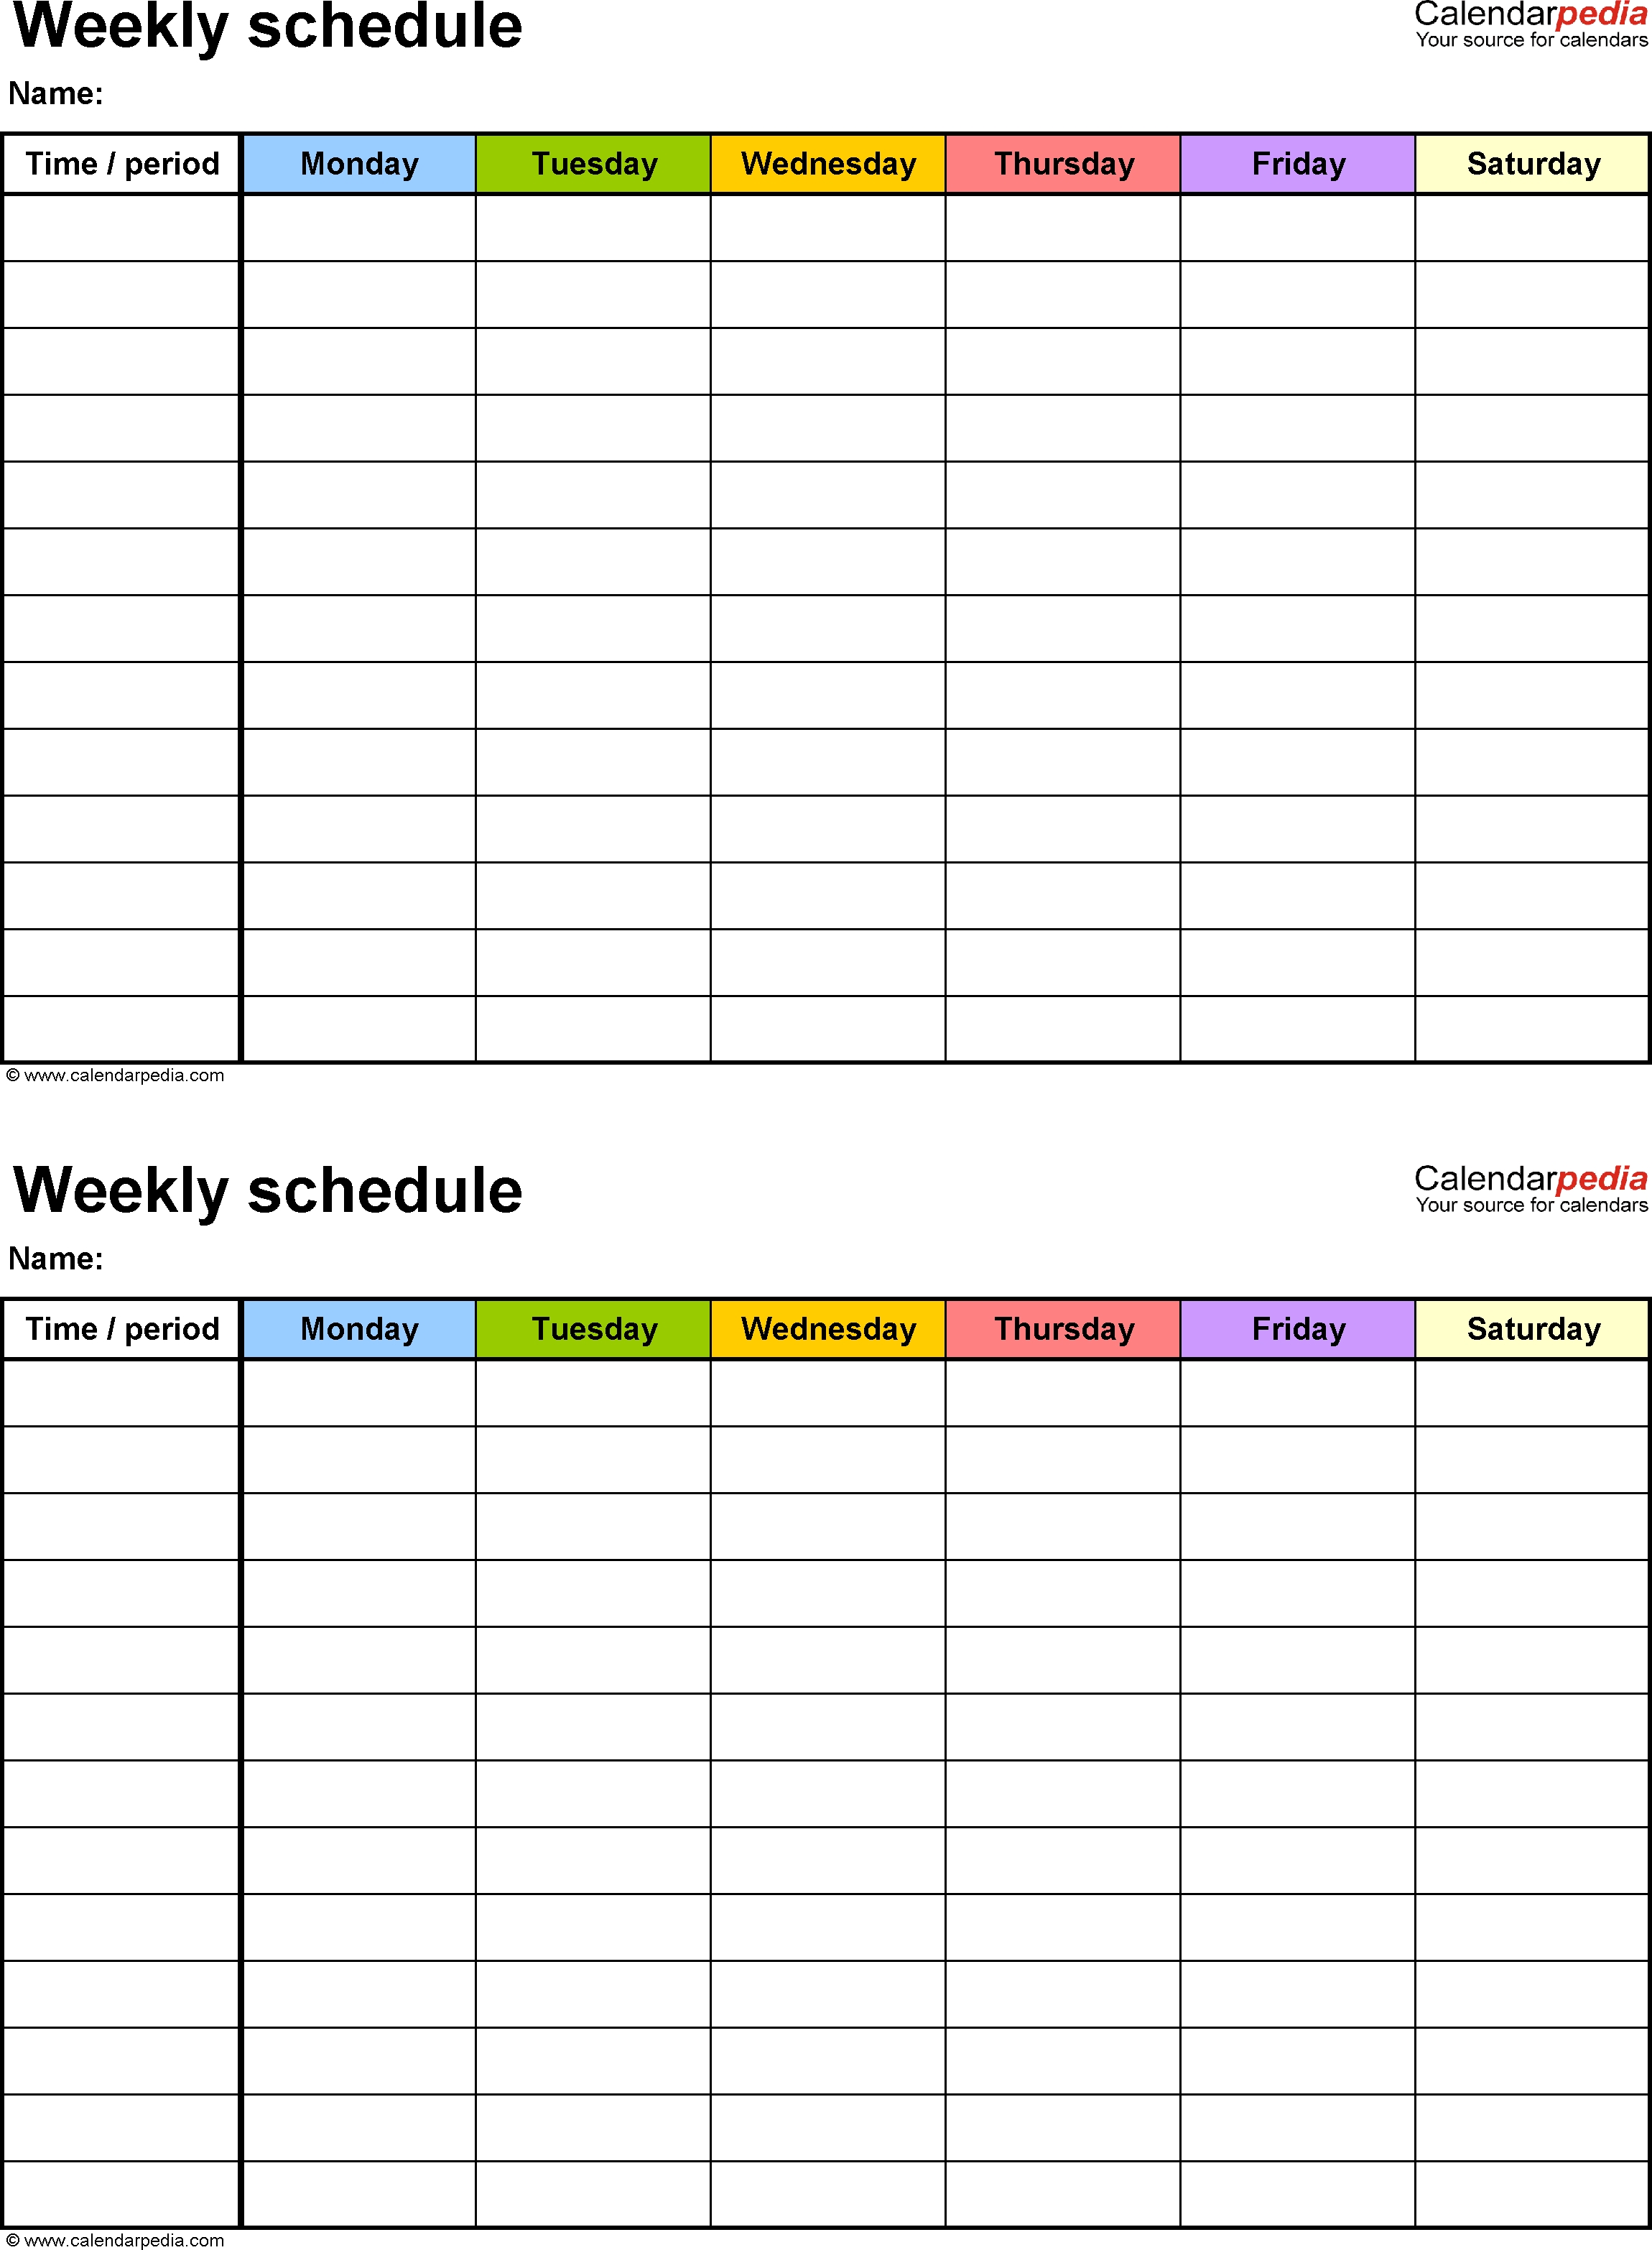 Free Weekly Schedule Templates For Excel - 18 Templates in One Week Daily Calendar Printable